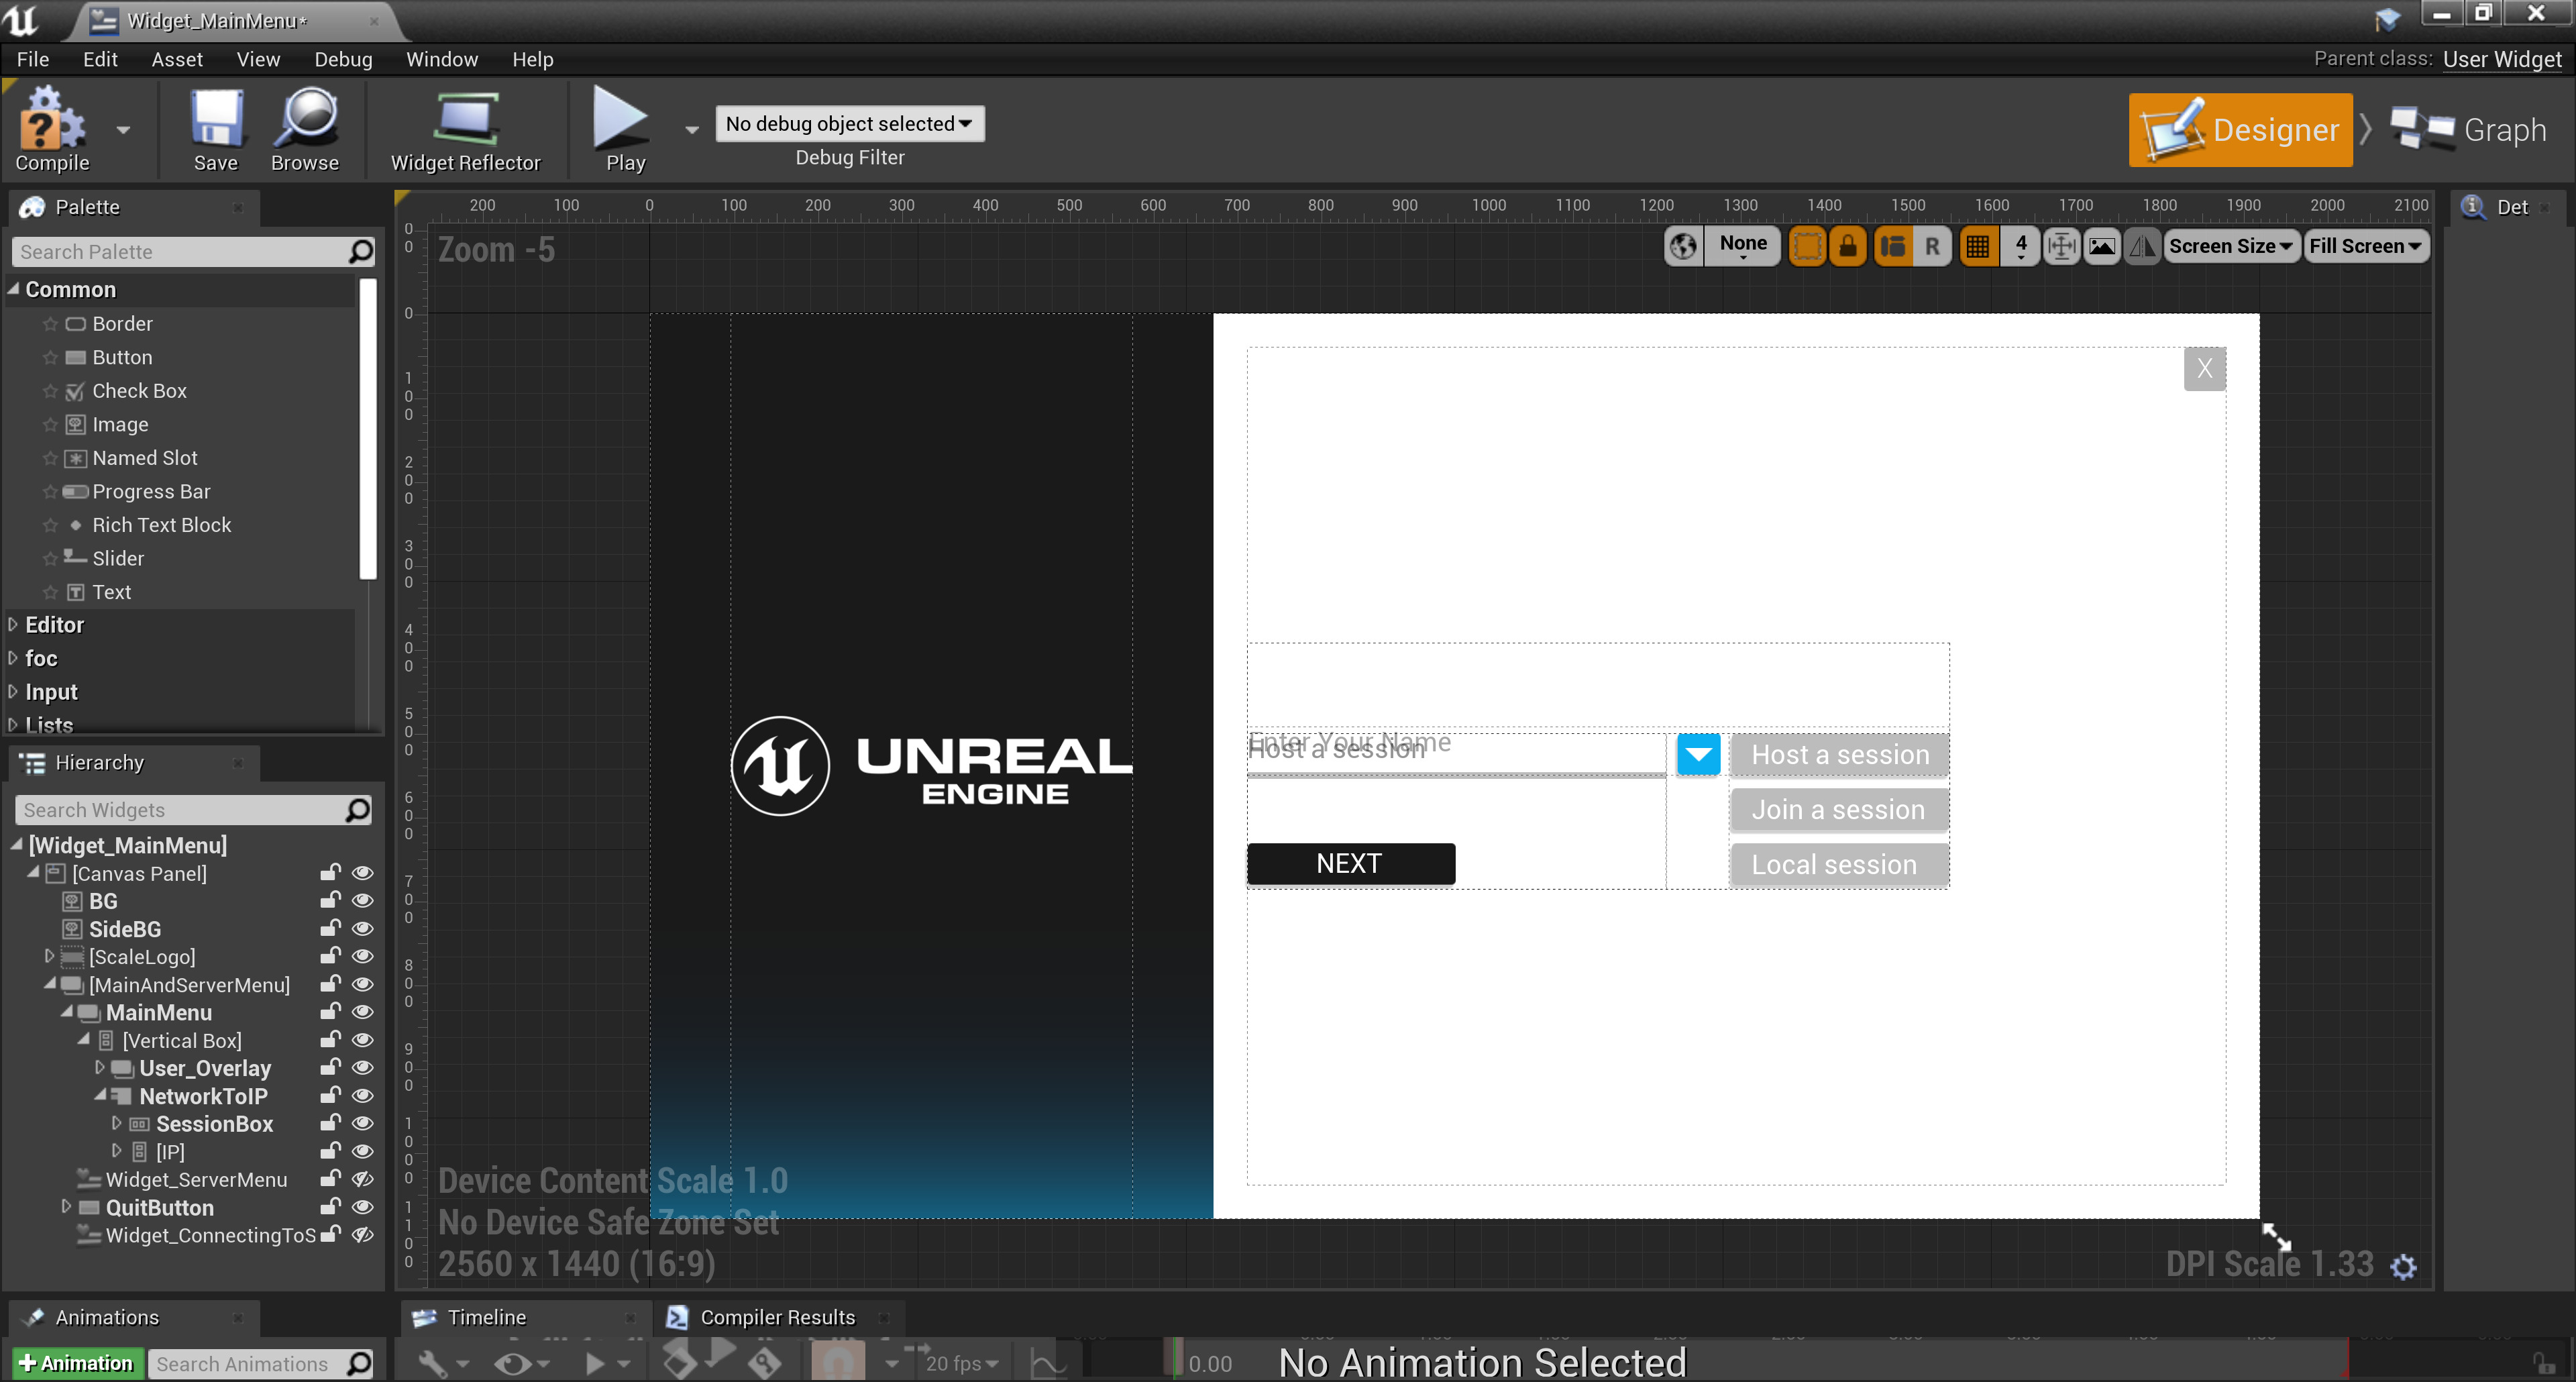 Annotating in the Collab Viewer in Unreal Engine